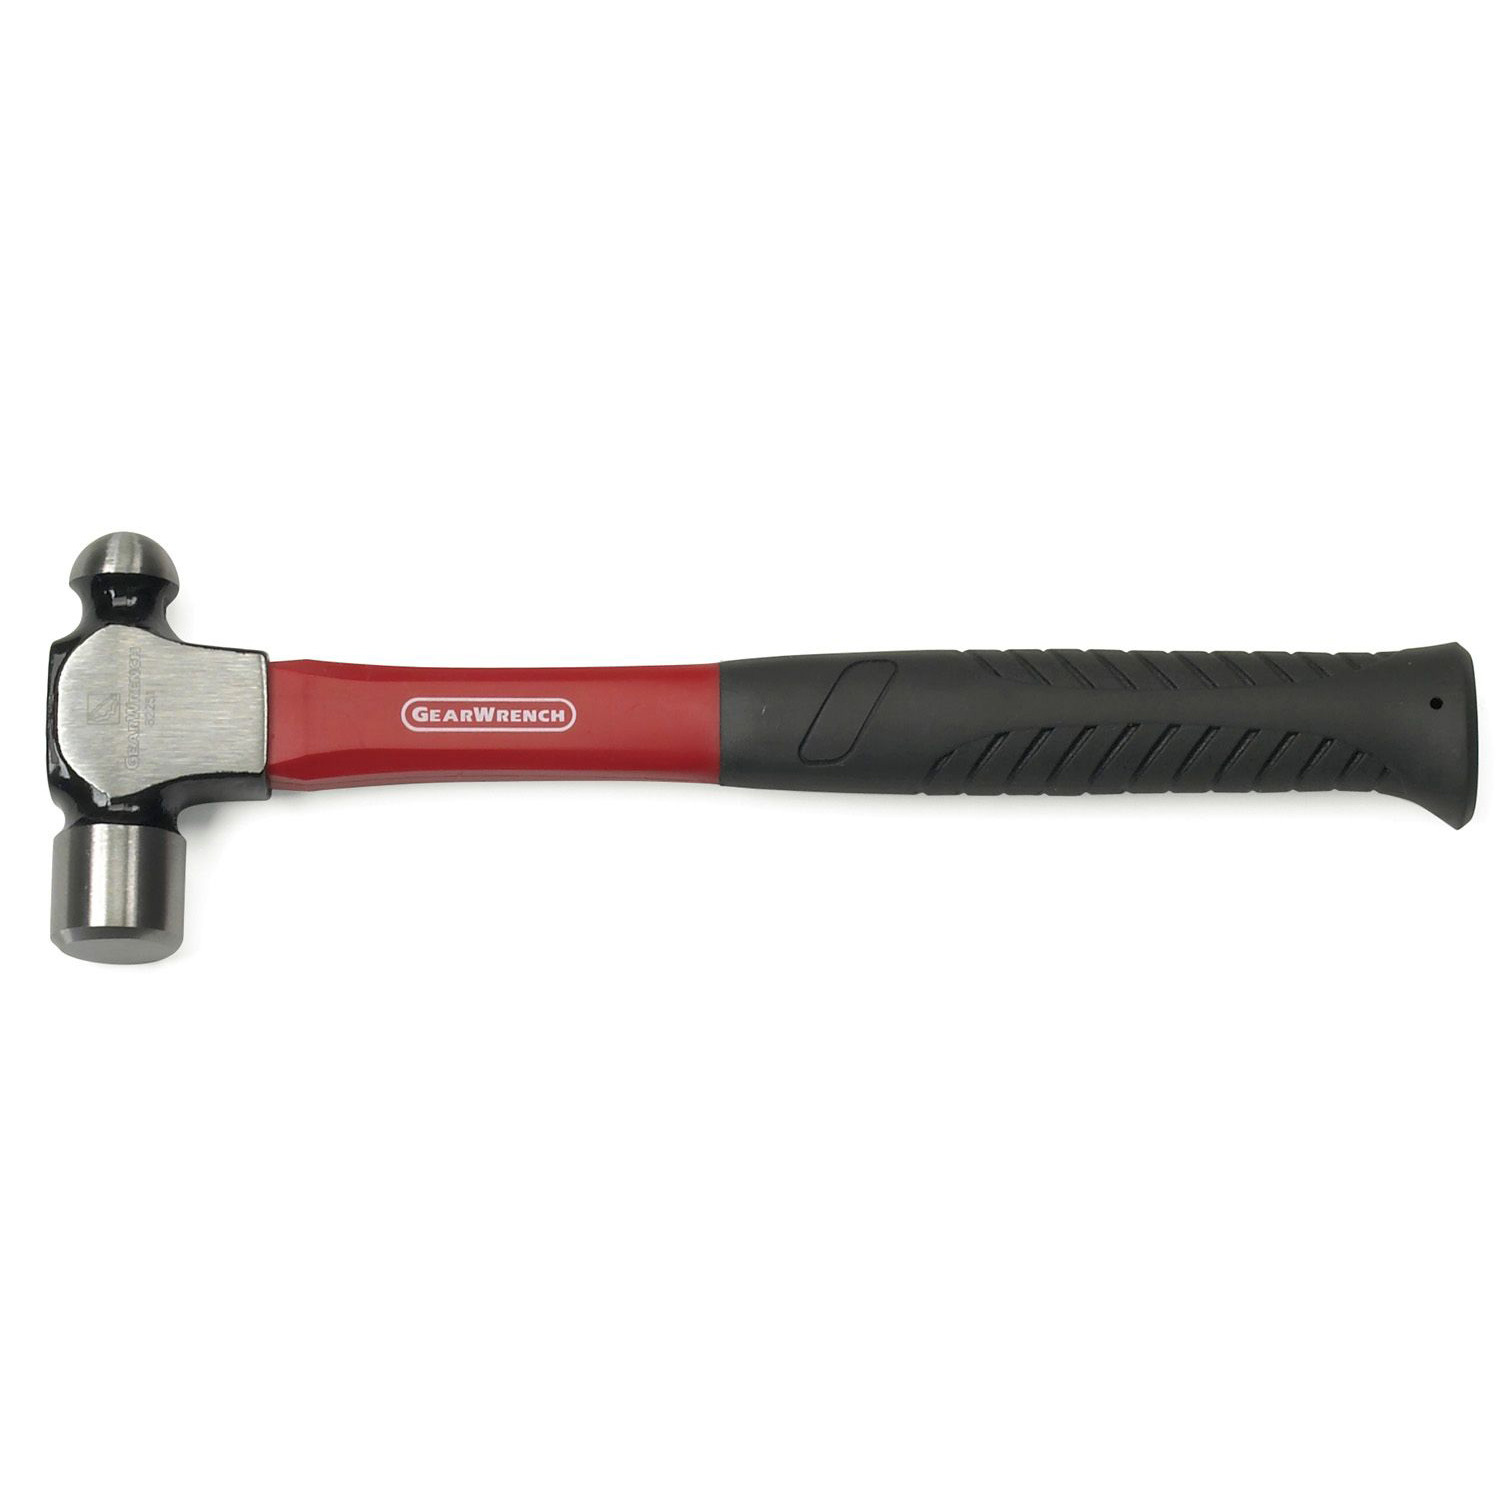 GearWrench 16 oz. Ball Pein Hammer with Fiberglass Handle 82251